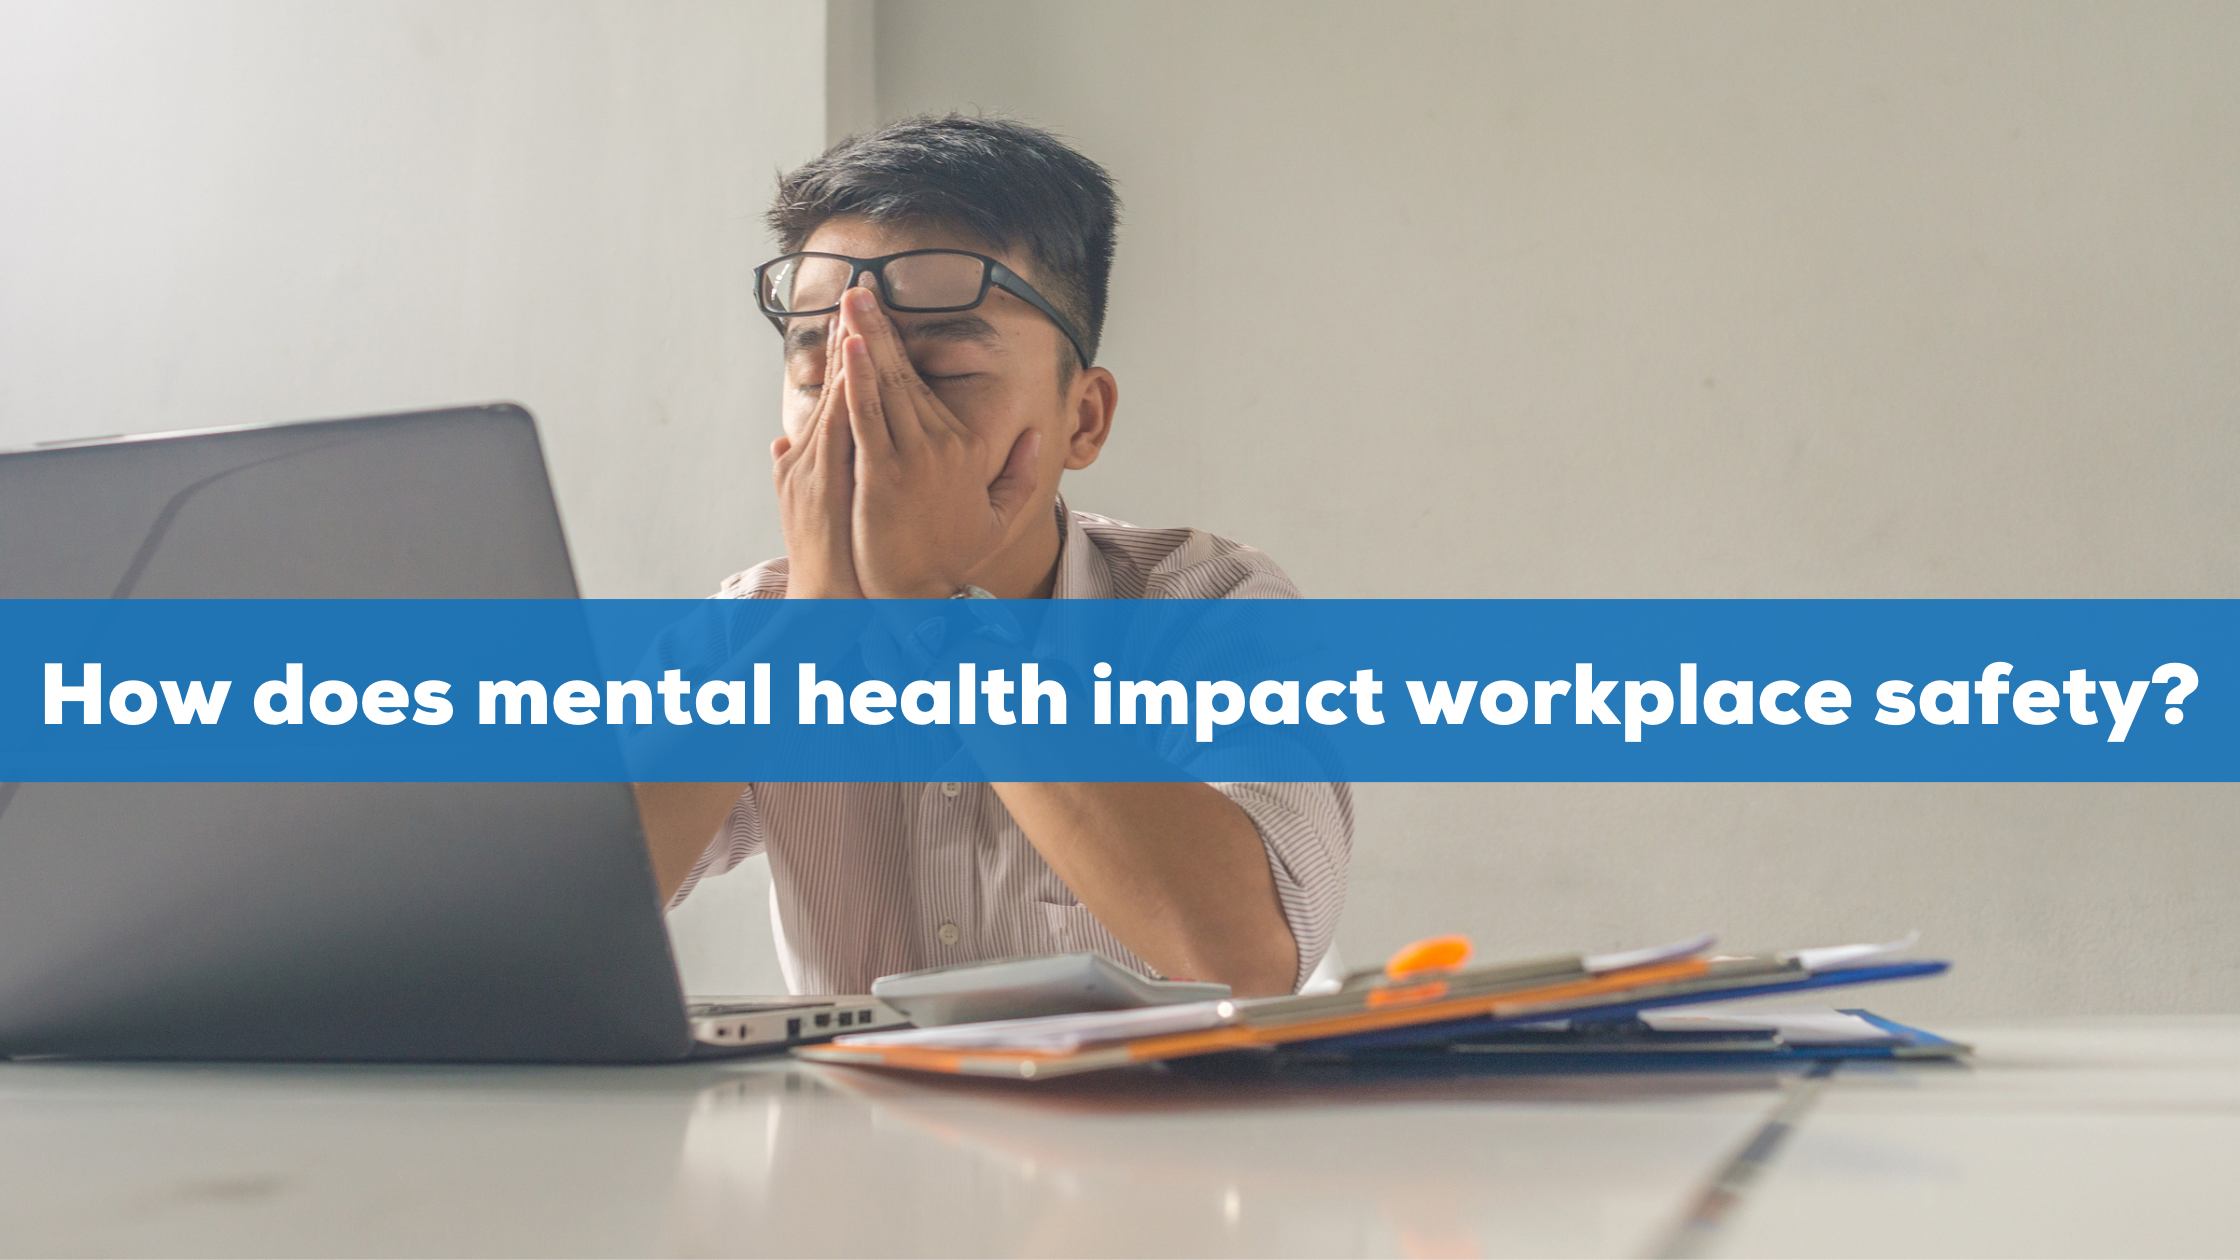 How does mental health impact workplace safety?